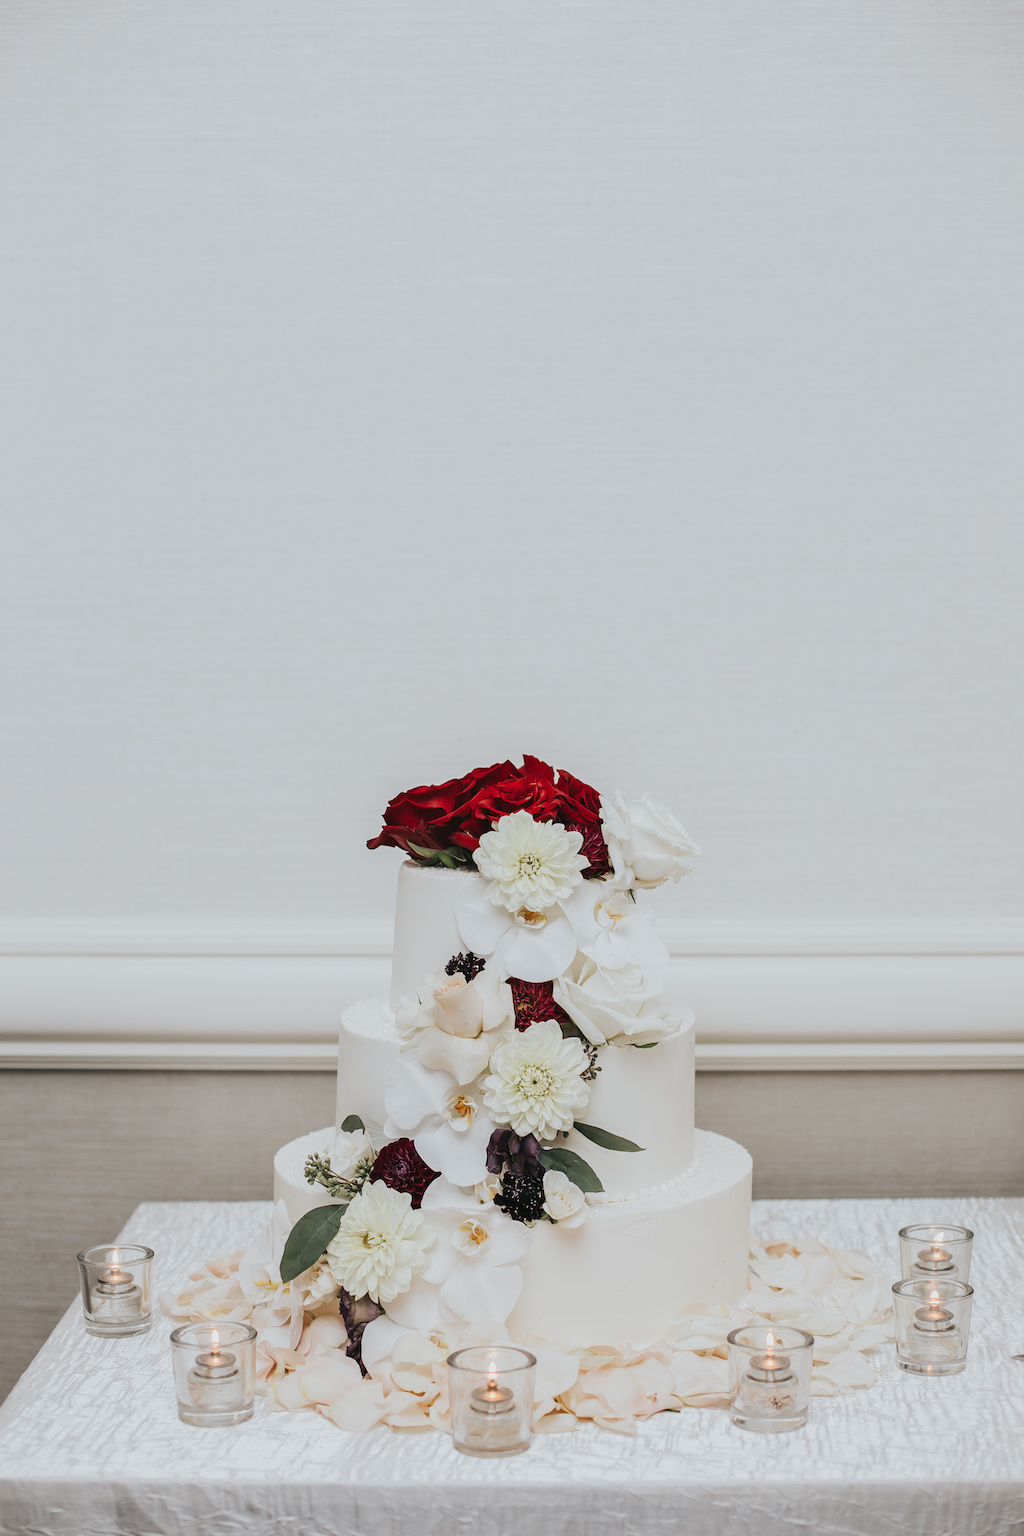 Three Tier Round White Wedding Cake with White, Red, and Greenery Florals with Flower Petals and Votive Candles | Clearwater Beach Wedding Cake Bakery A Piece of Cake